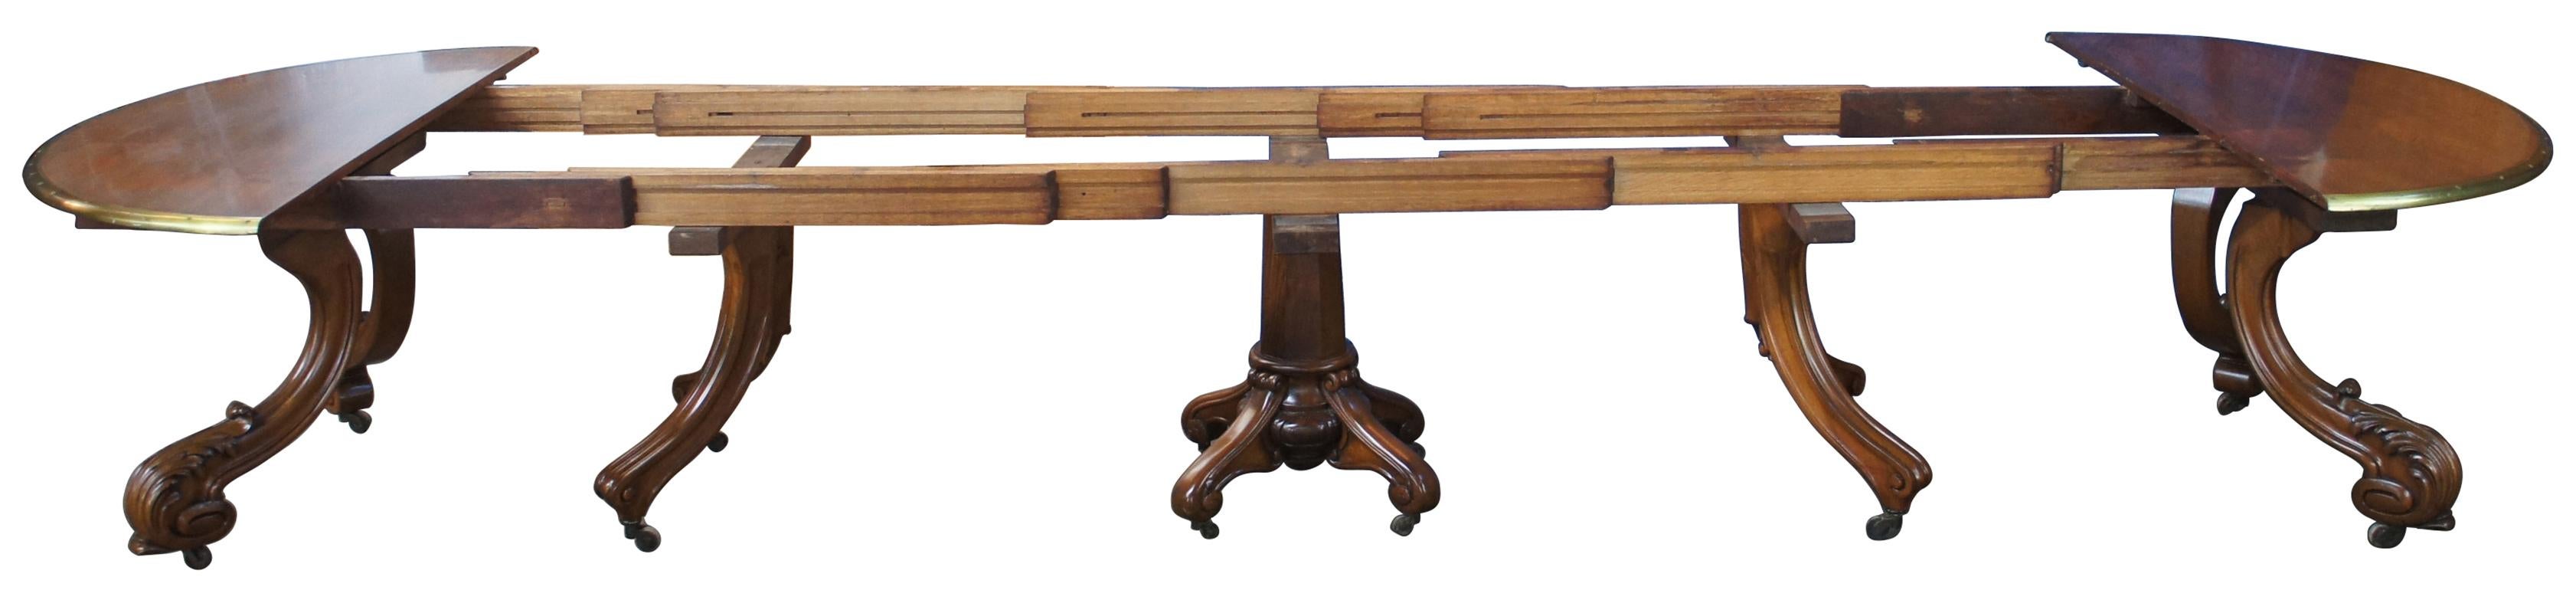 Monumental Victorian Walnut Extendable Boardroom Conference Dining Table For Sale 3